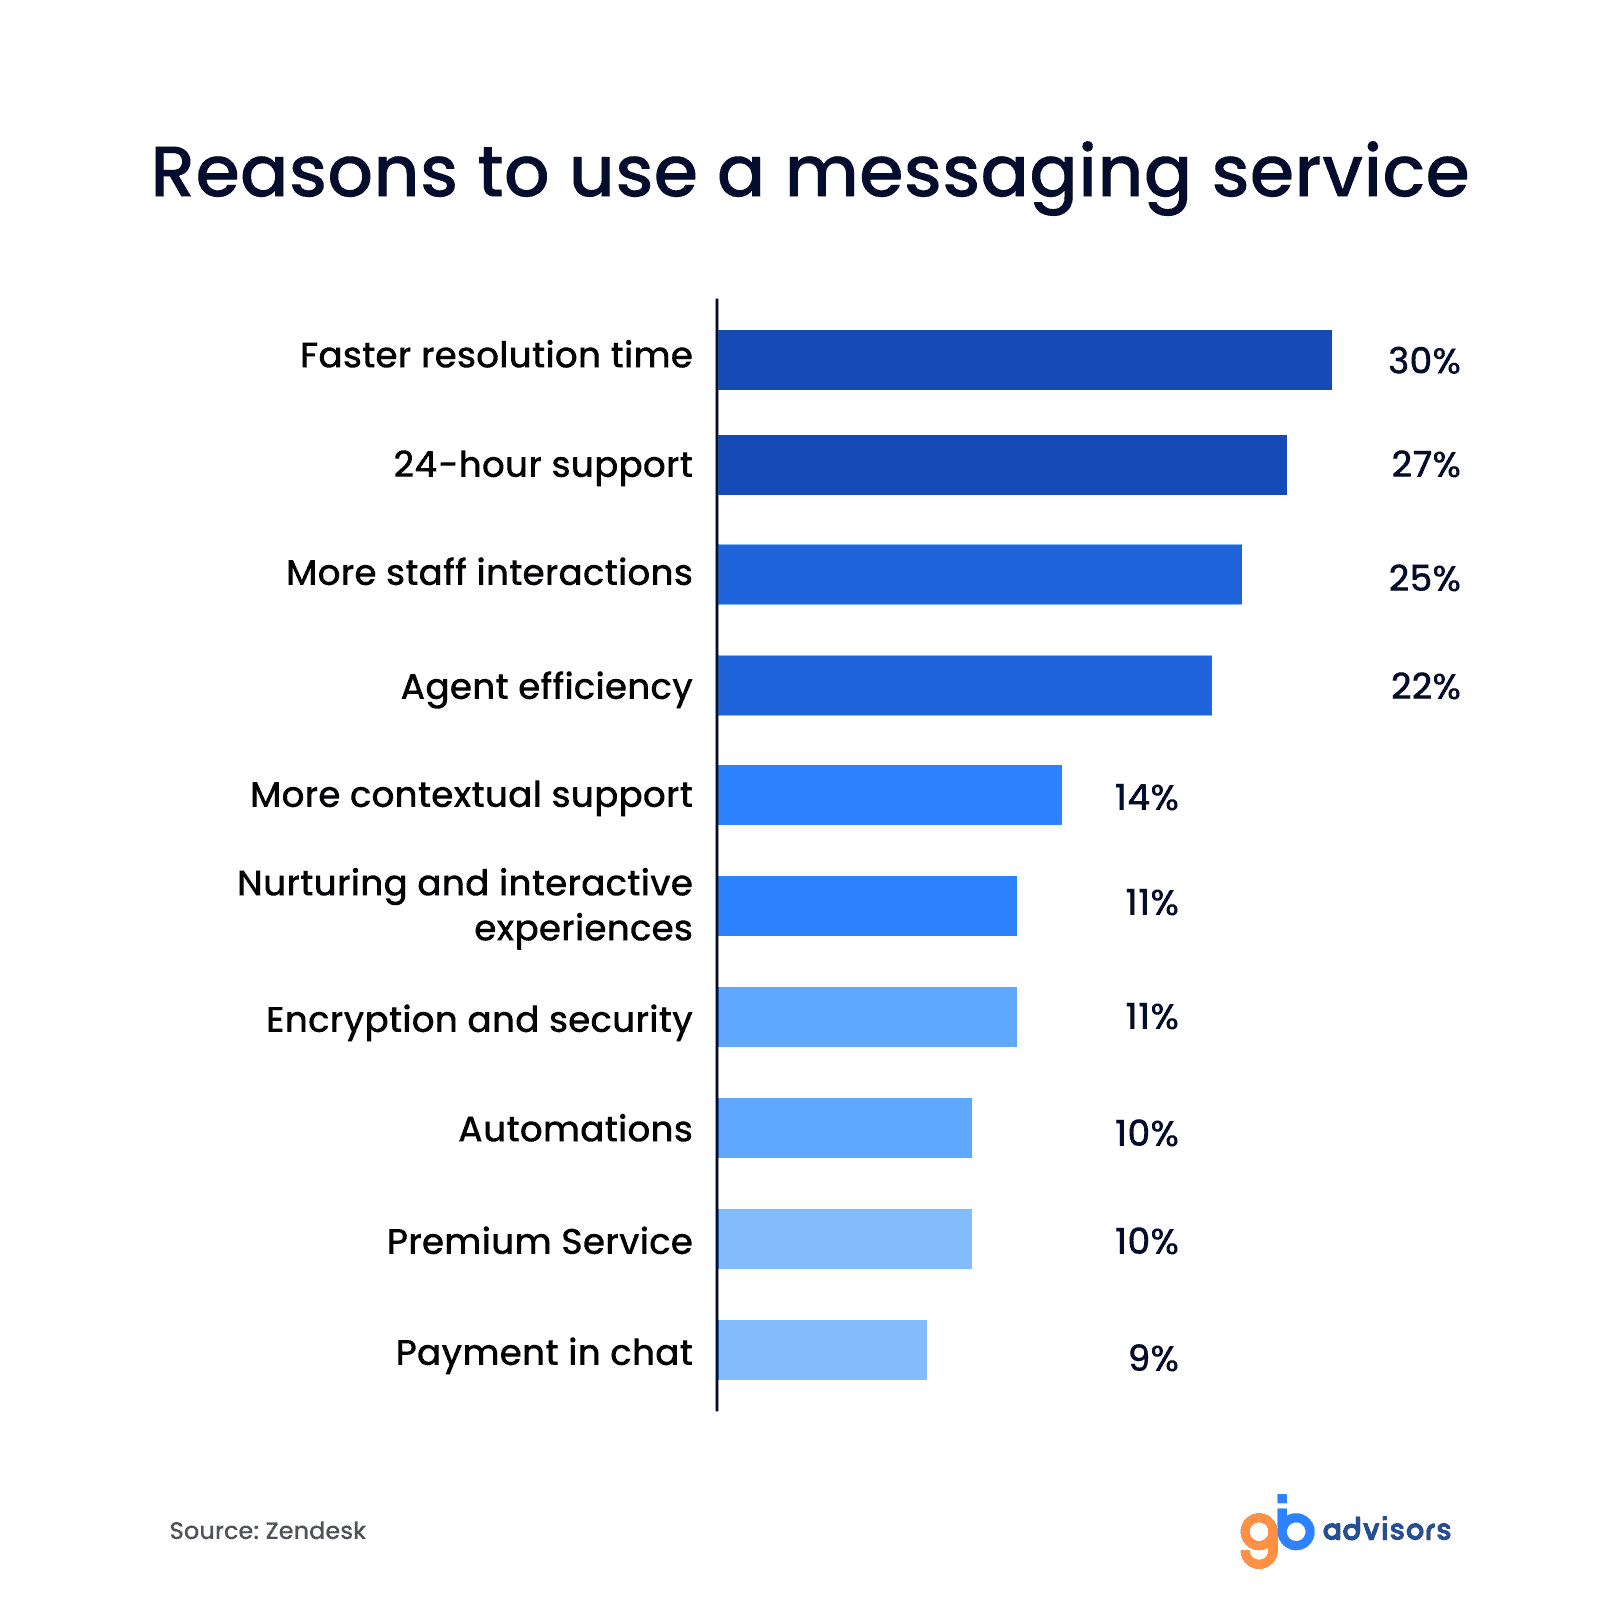 Reasons for using a messaging service